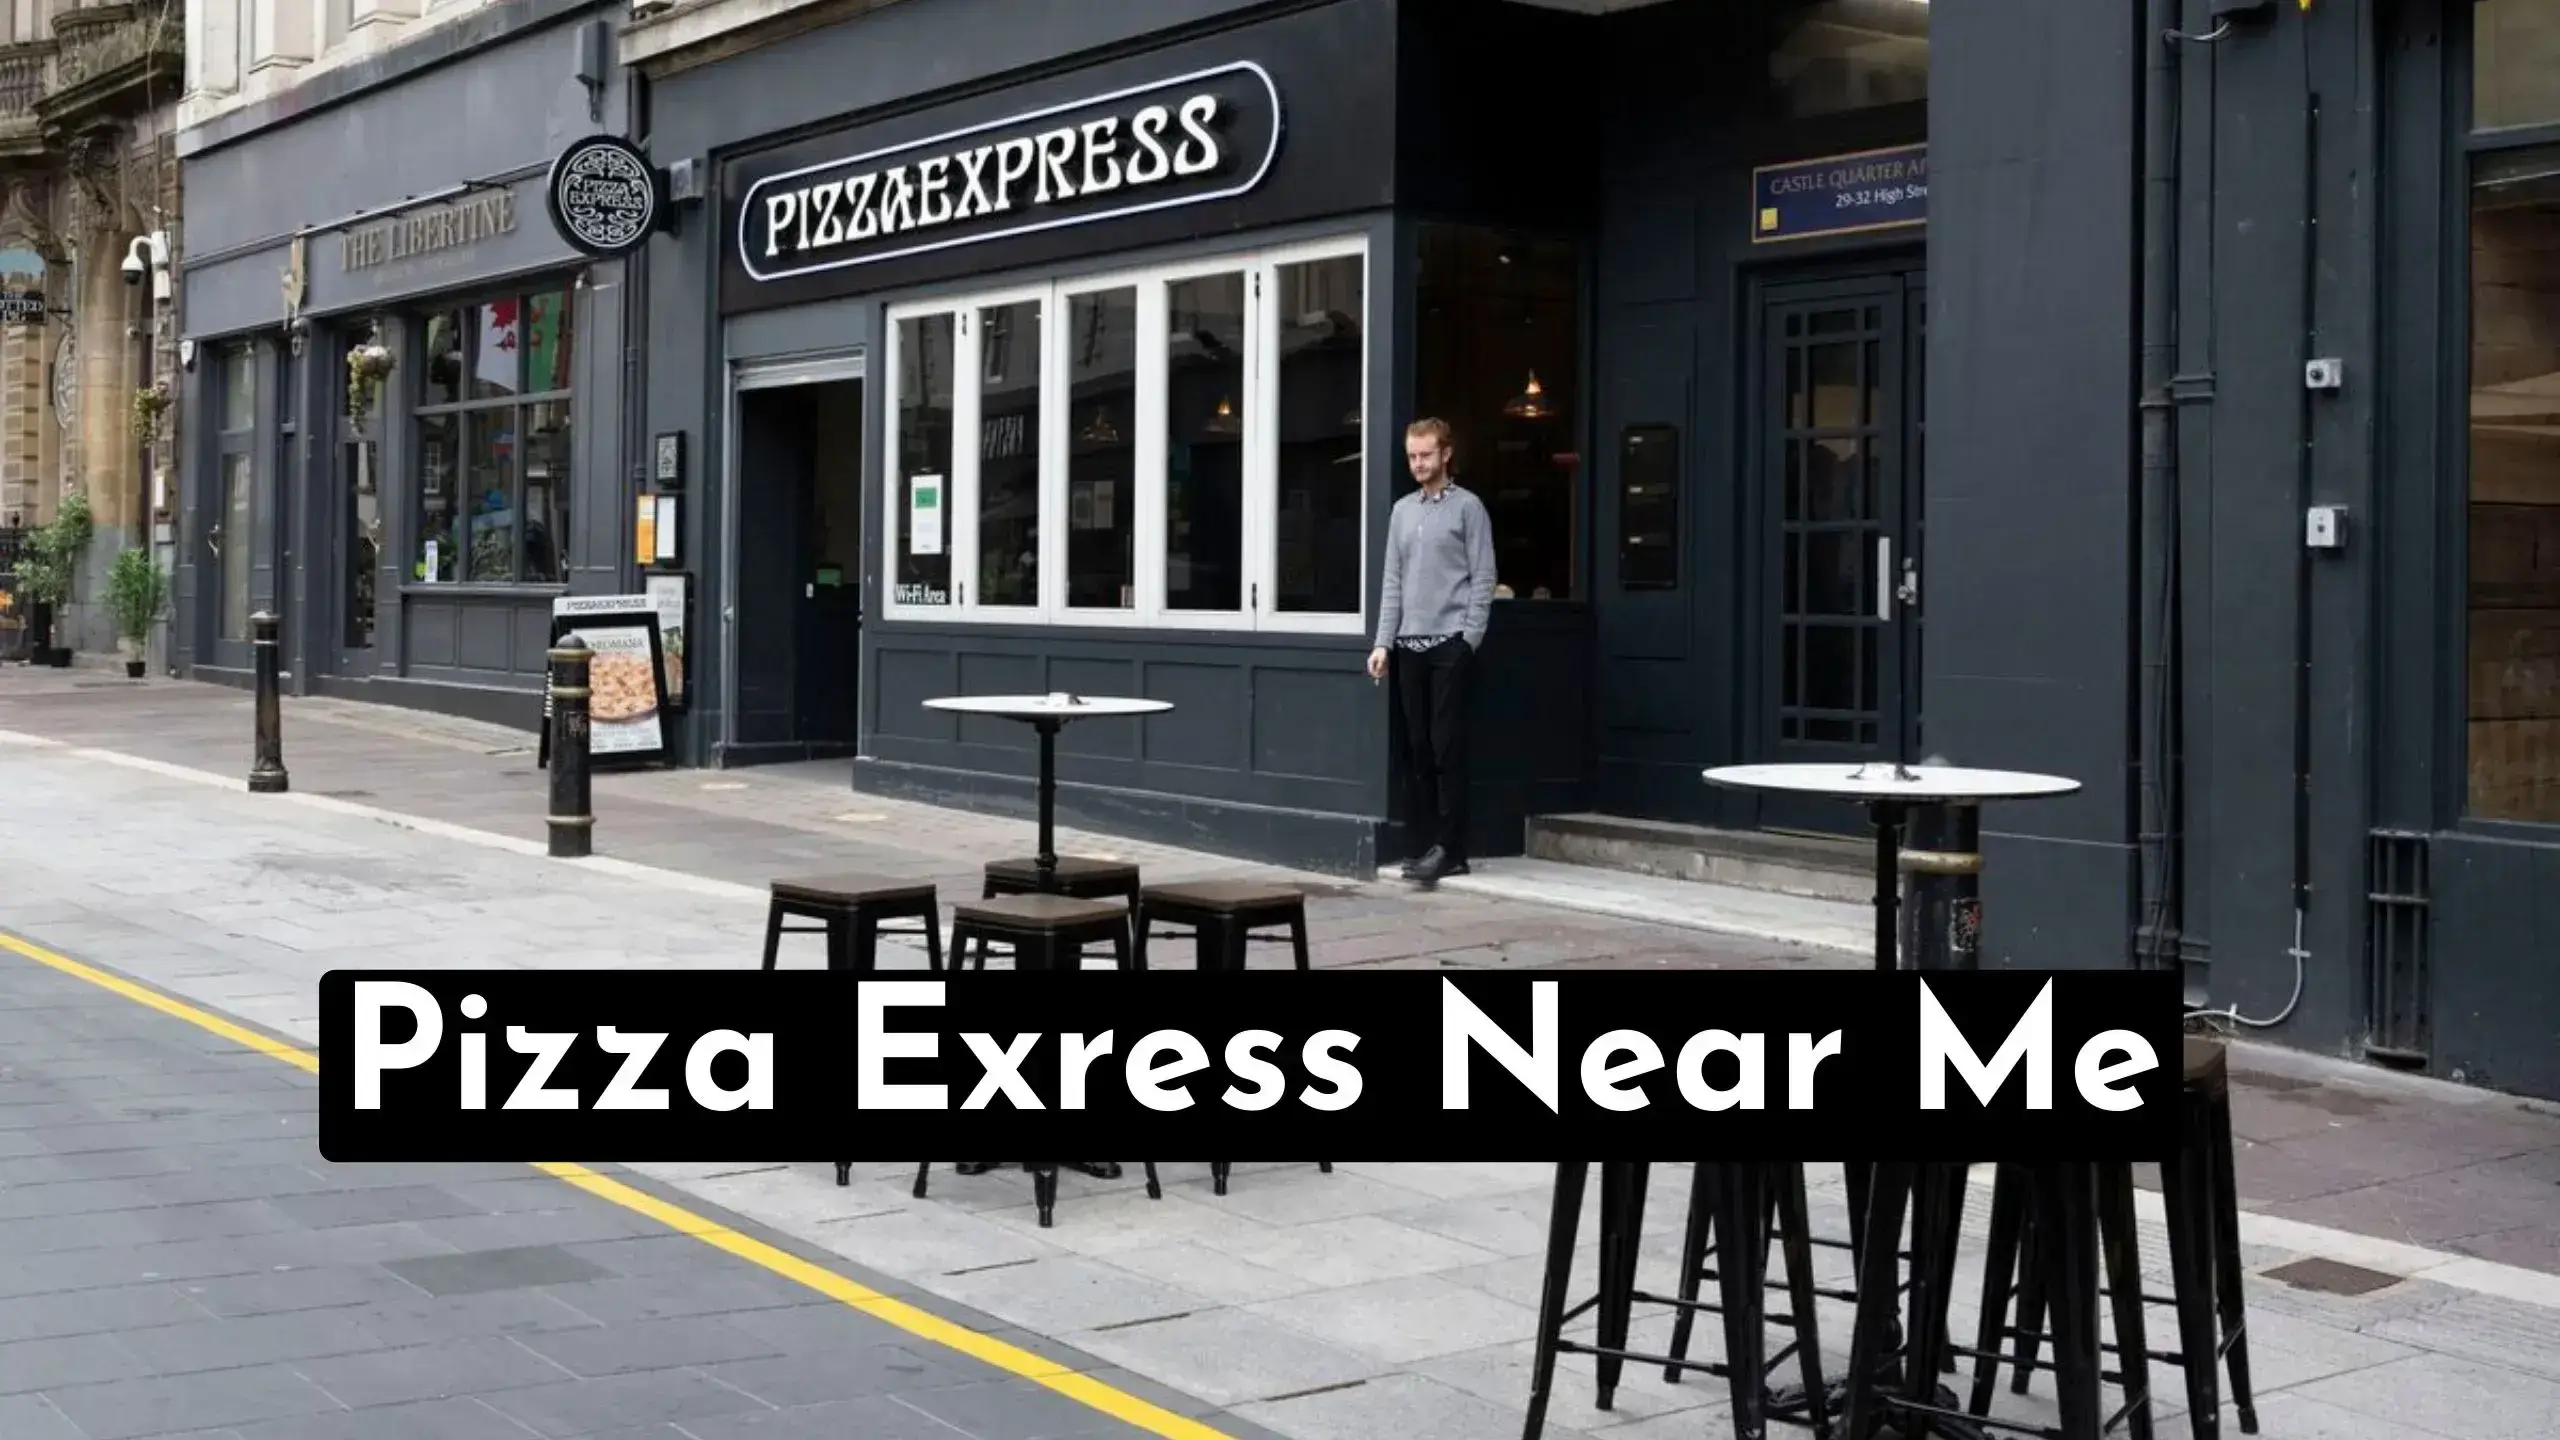 Pizza Express Near Me – Find Your Favorite Pizza!